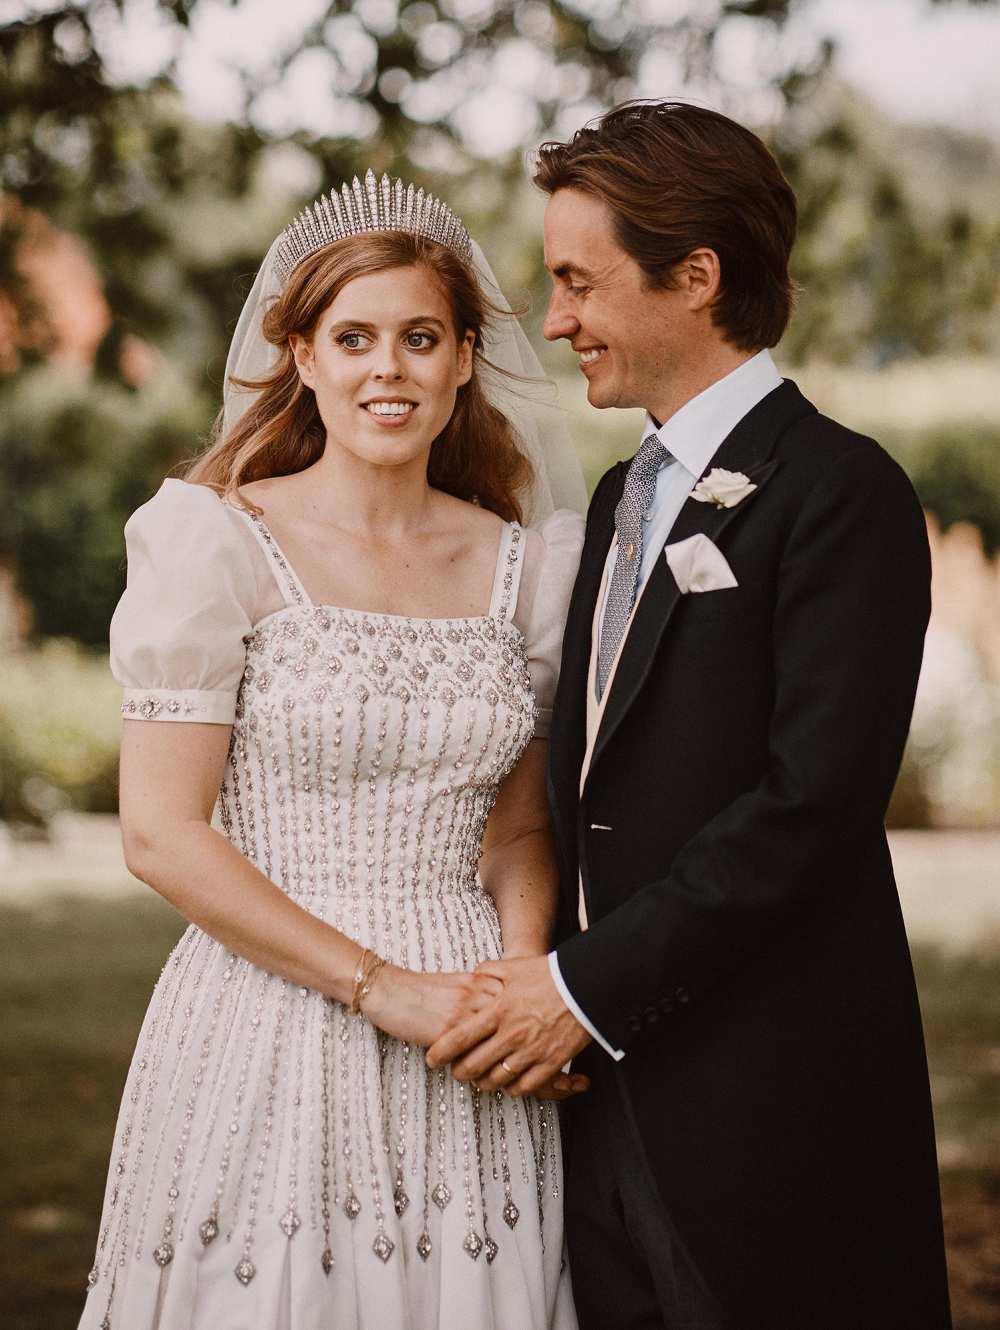 Prince Andrew Gave a Speech at Daughter Princess Beatrice’s Wedding Reception Amid Scandal